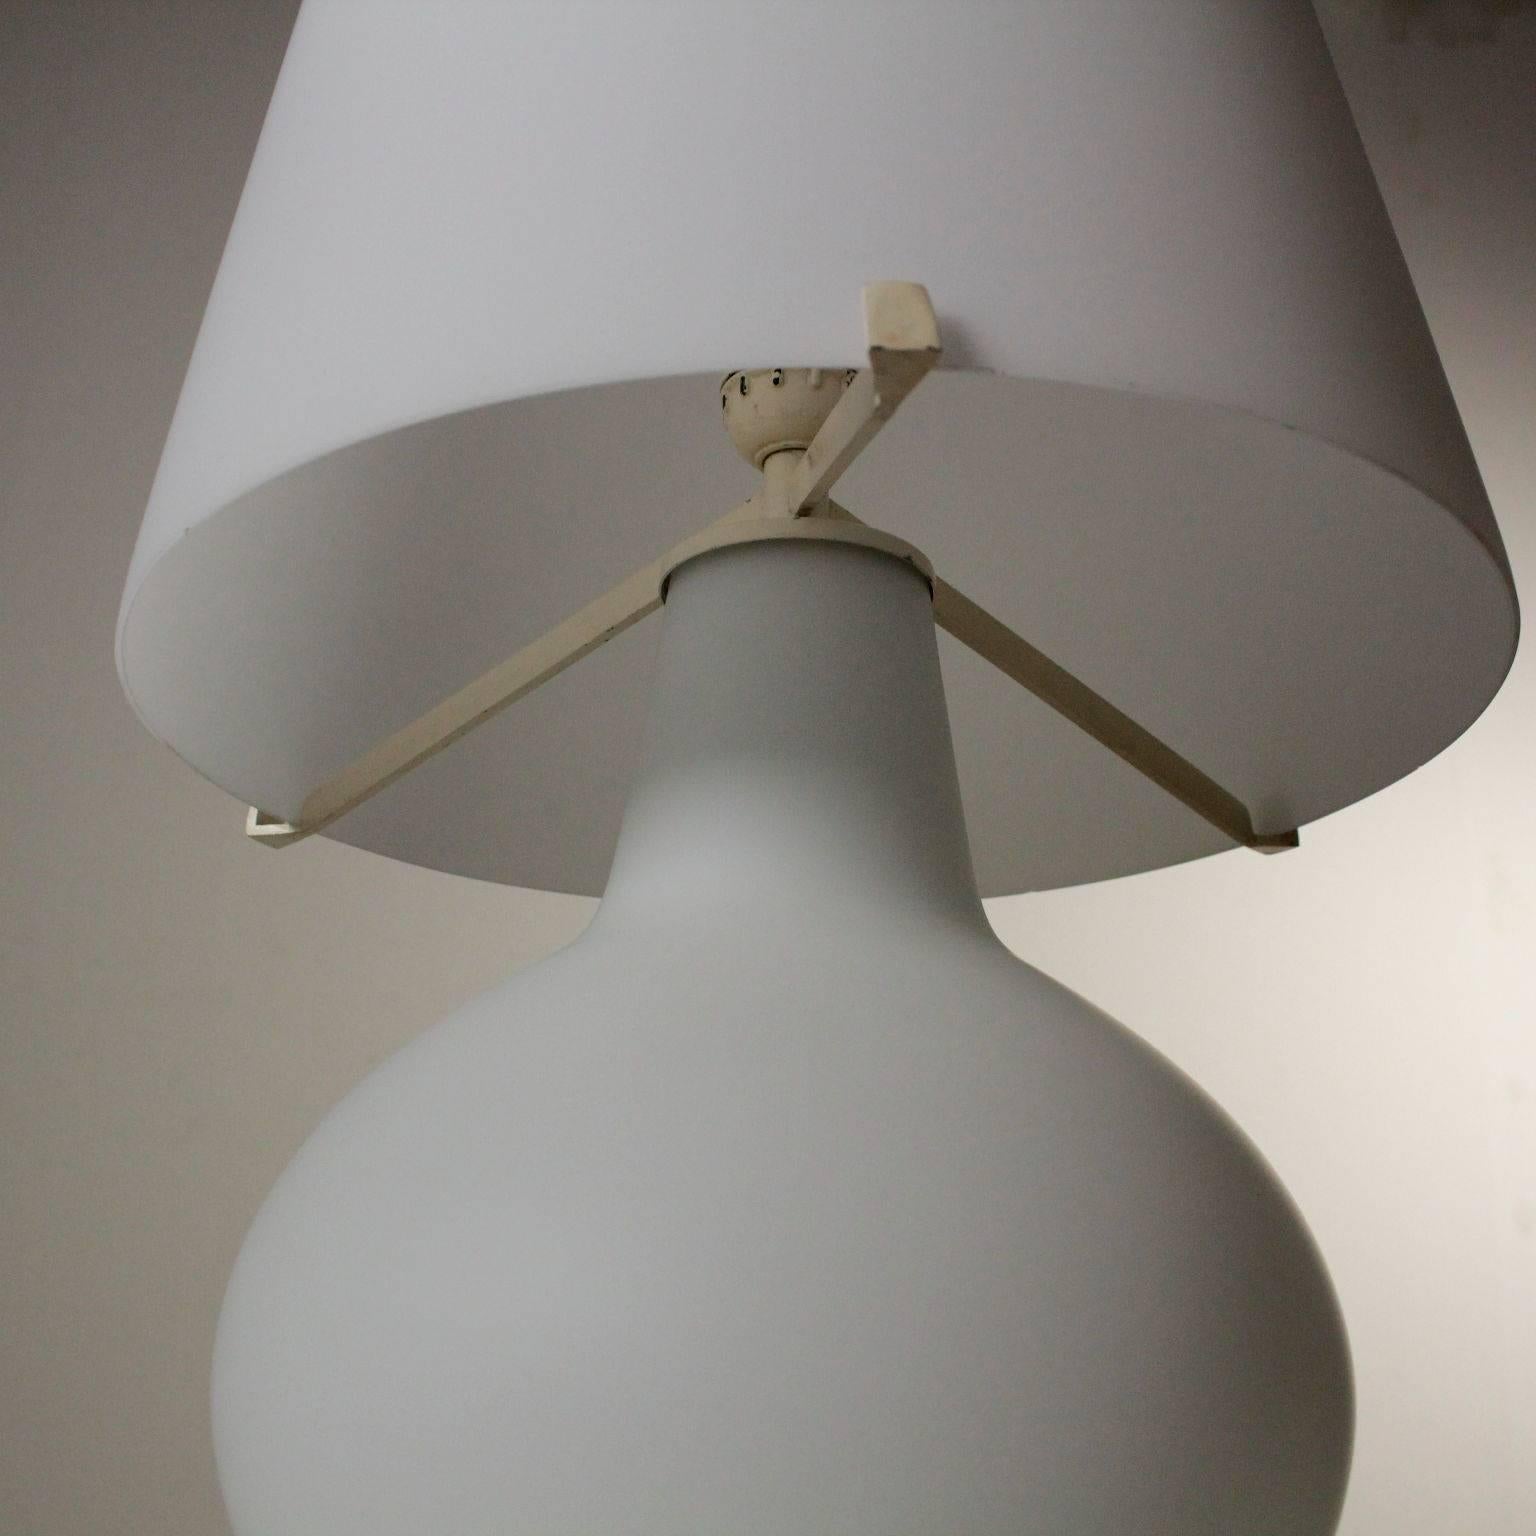 Italian Table Lamp Designed for FontanaArte by Max Ingrand Vintage, Italy, 1960s-1970s